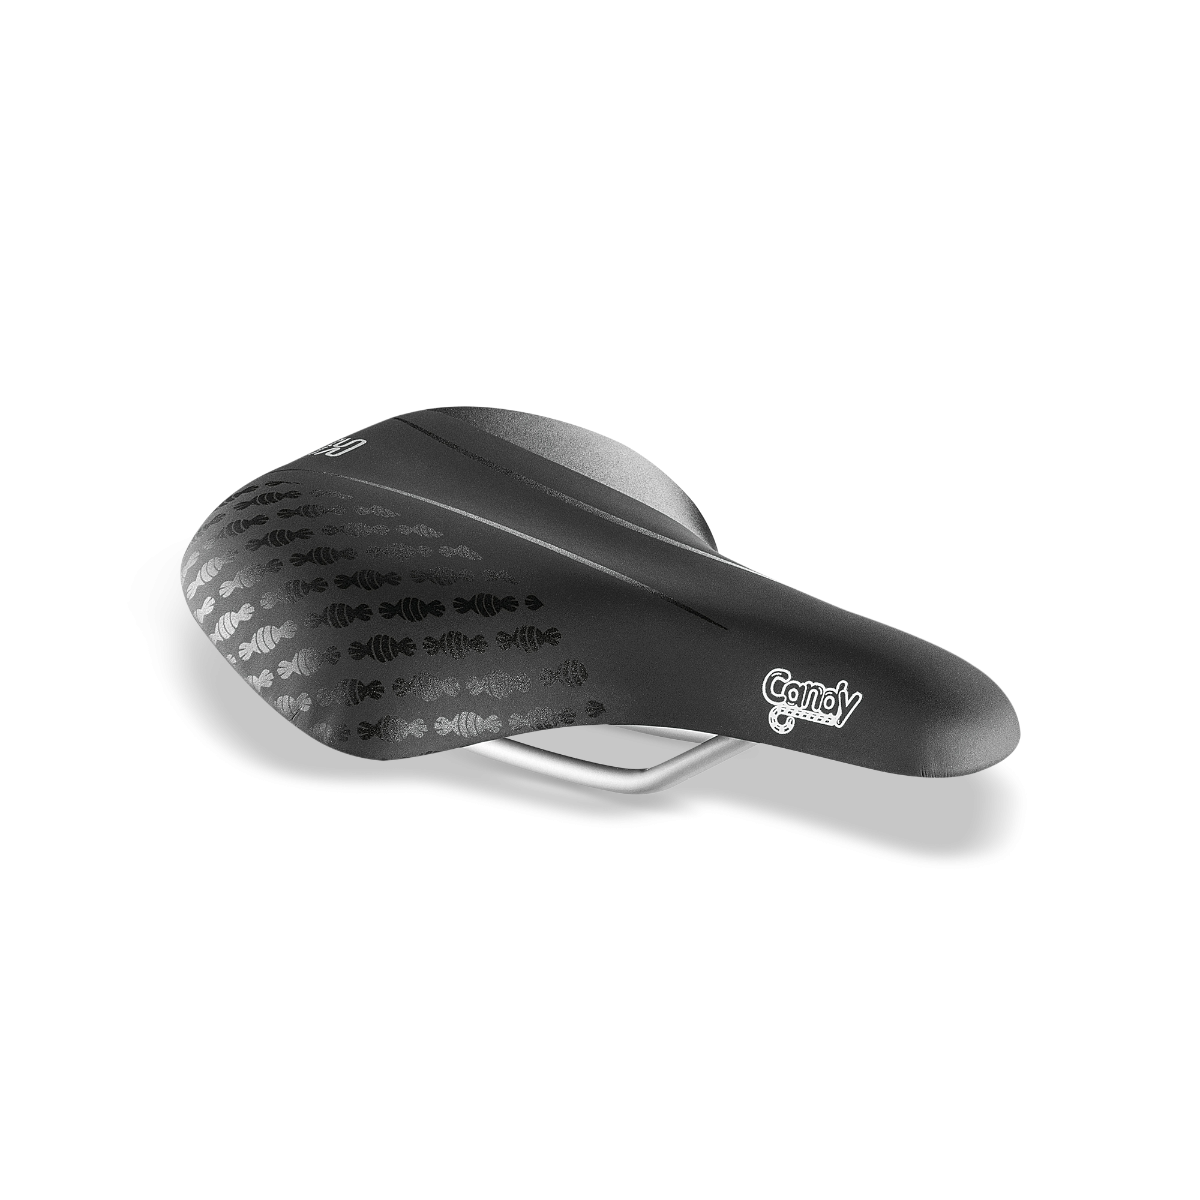 Candy - Selle Royal